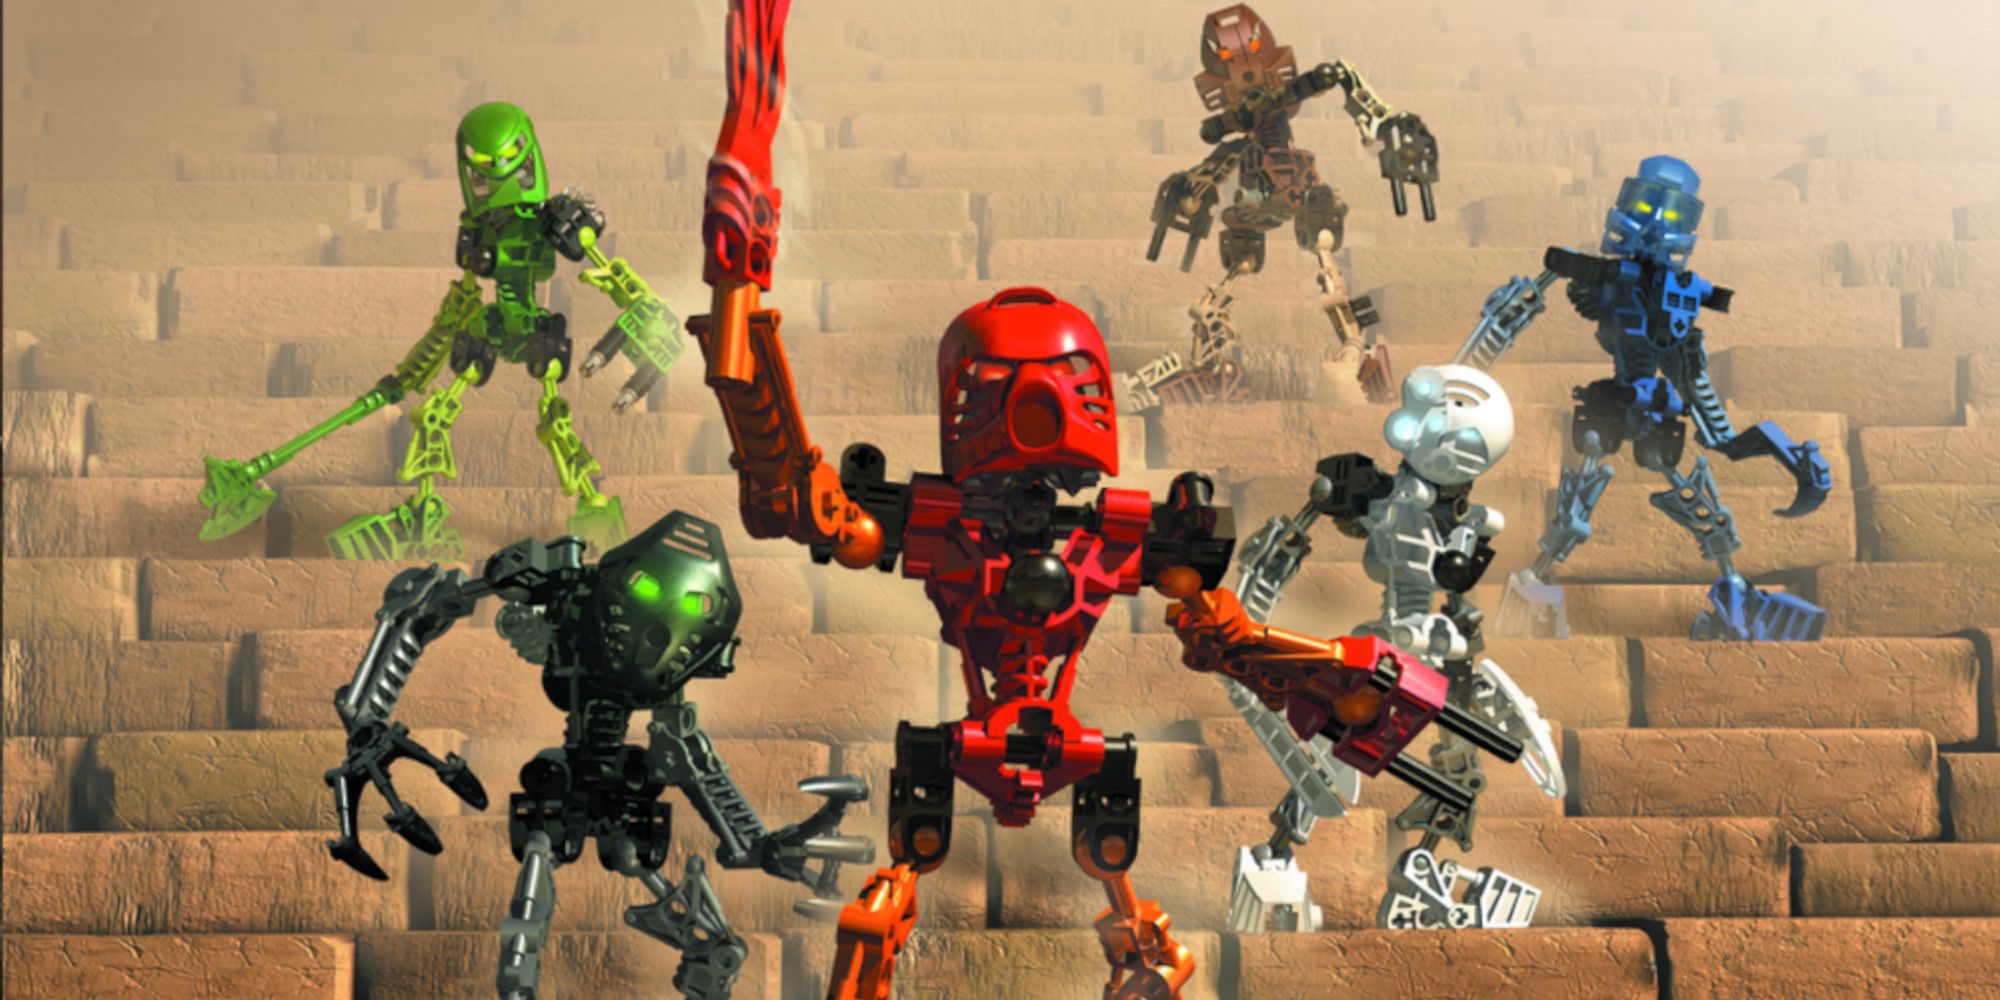 LEGO BIONICLE rumoured to come back in 2025